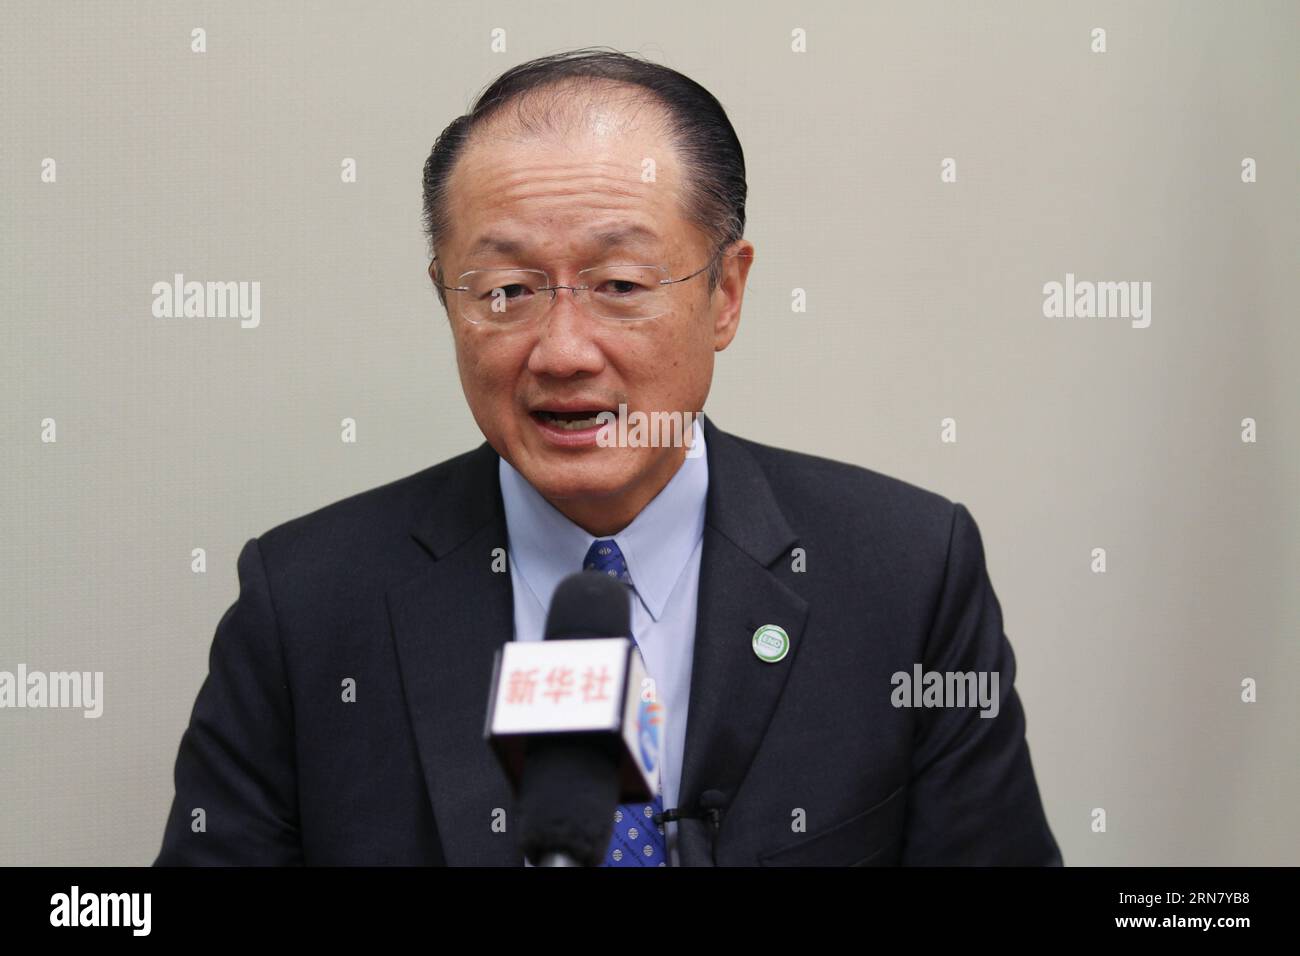 NEW YORK, Sept. 24, 2015 -- World Bank President Jim Yong Kim speaks during a group interview at the bank s New York office, the United States, Sept. 24, 2015. China has an important role to play in realizing global poverty reduction targets, World Bank President Jim Yong Kim said on the occasion of Chinese President Xi Jinping s scheduled attendance at the UN Sustainable Development Summit. ) (djj) U.S.-NEW YORK-XI JINPING-VISIT-WORLD BANK-JIM YONG KIM HuxYousong PUBLICATIONxNOTxINxCHN   New York Sept 24 2015 World Bank President Jim Yong Kim Speaks during a Group Interview AT The Bank S New Stock Photo